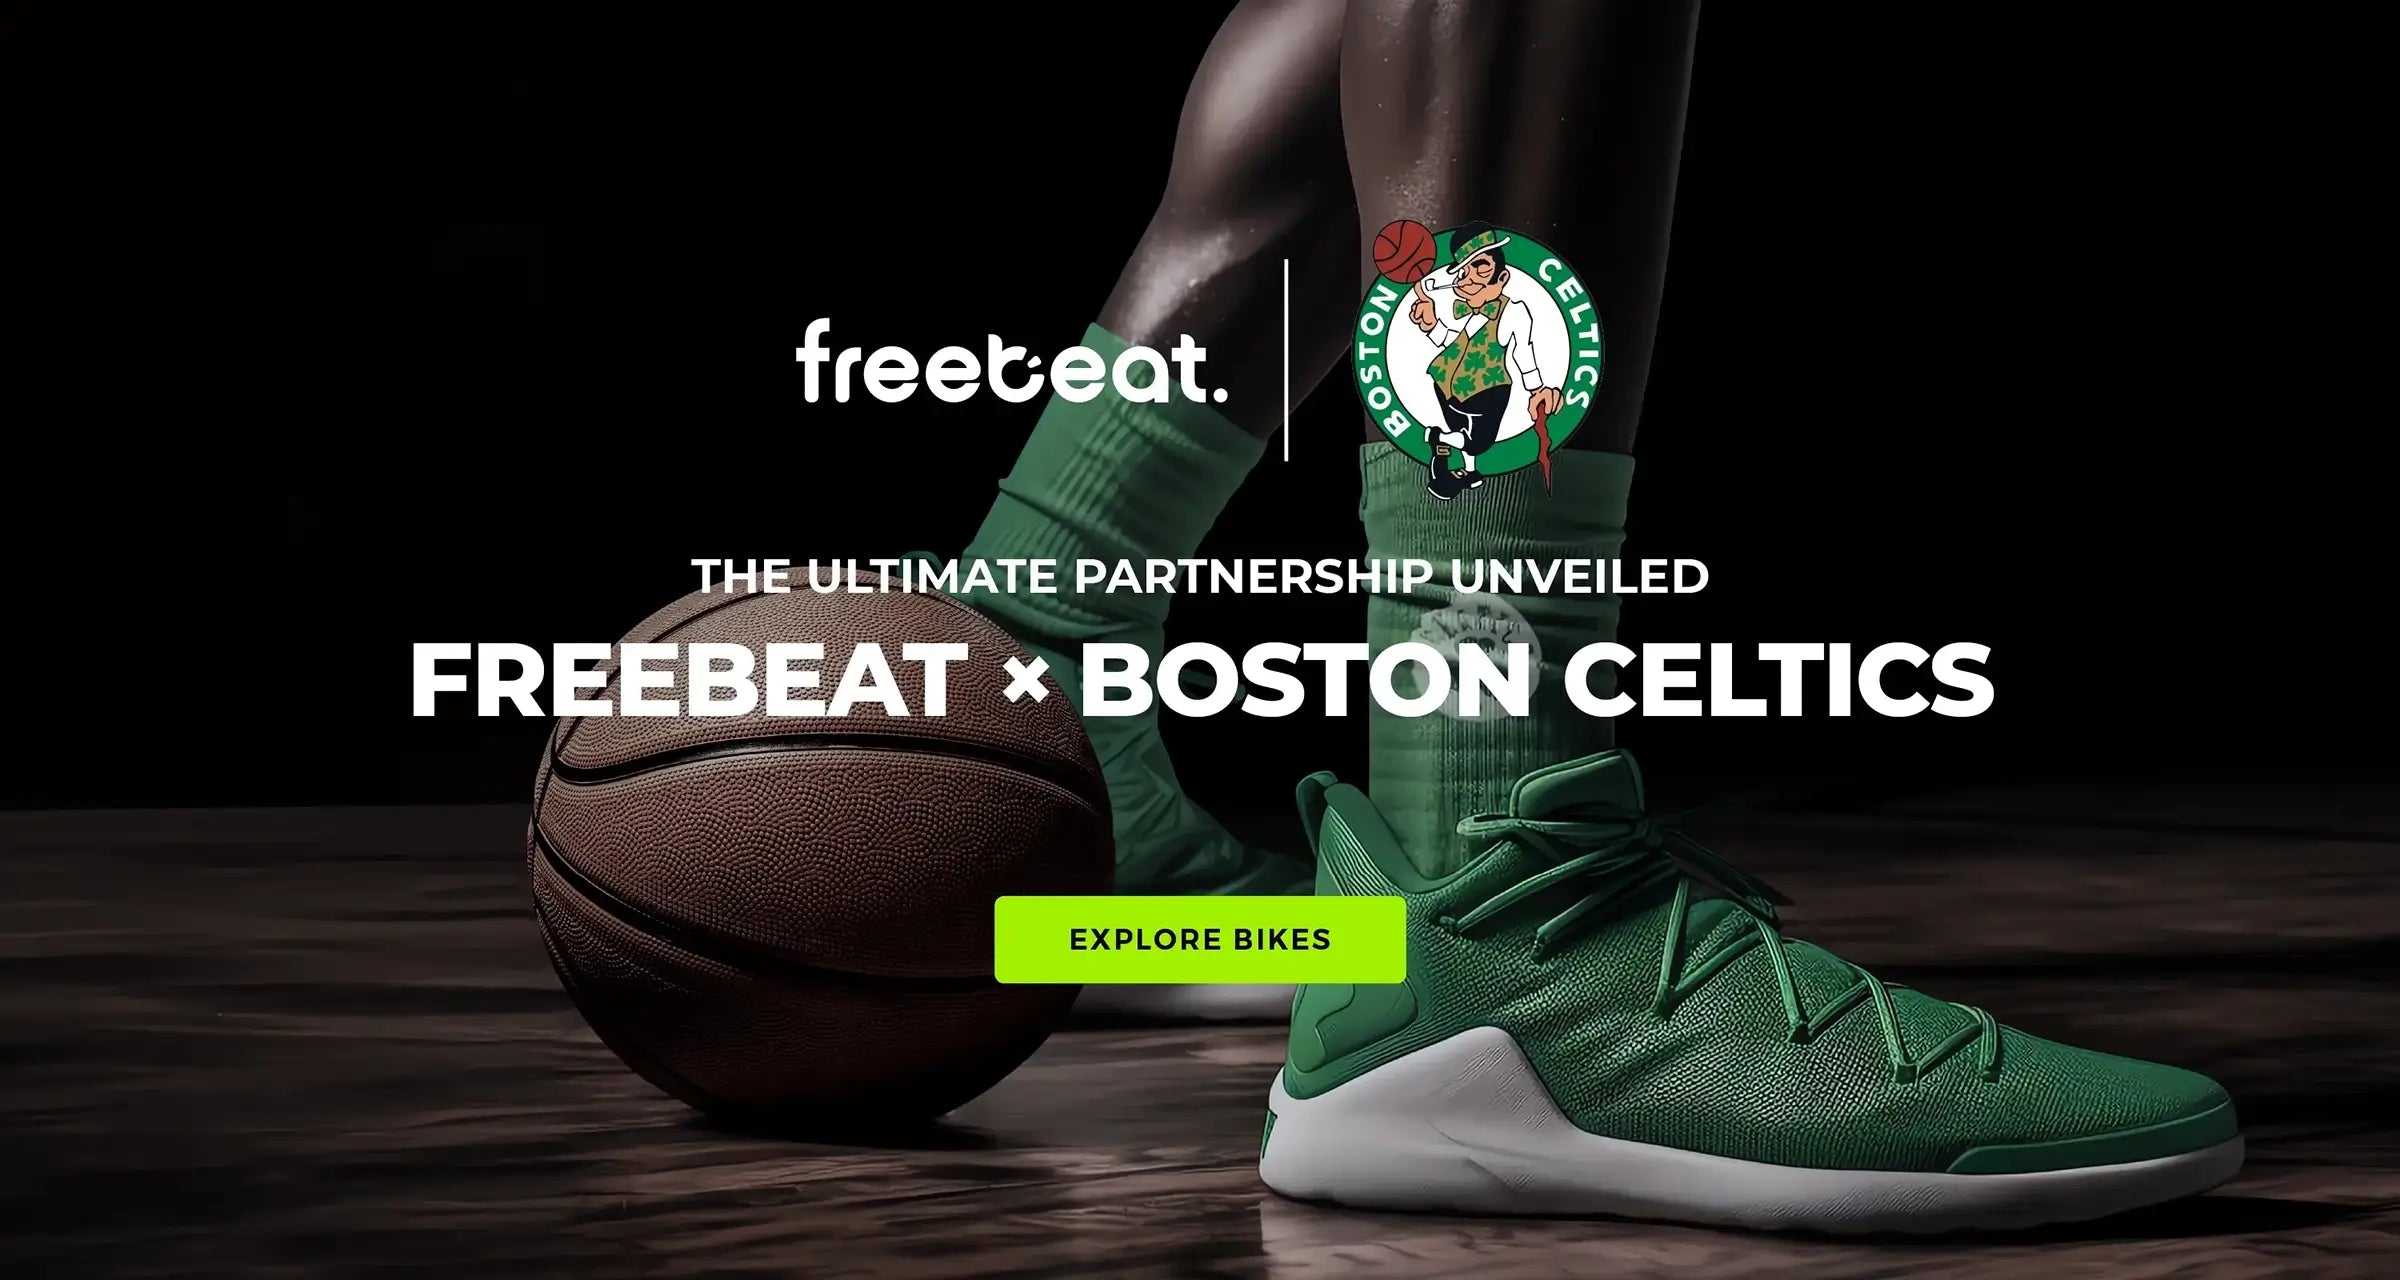 NBA News: freebeat became the official partner of Boston Celtics